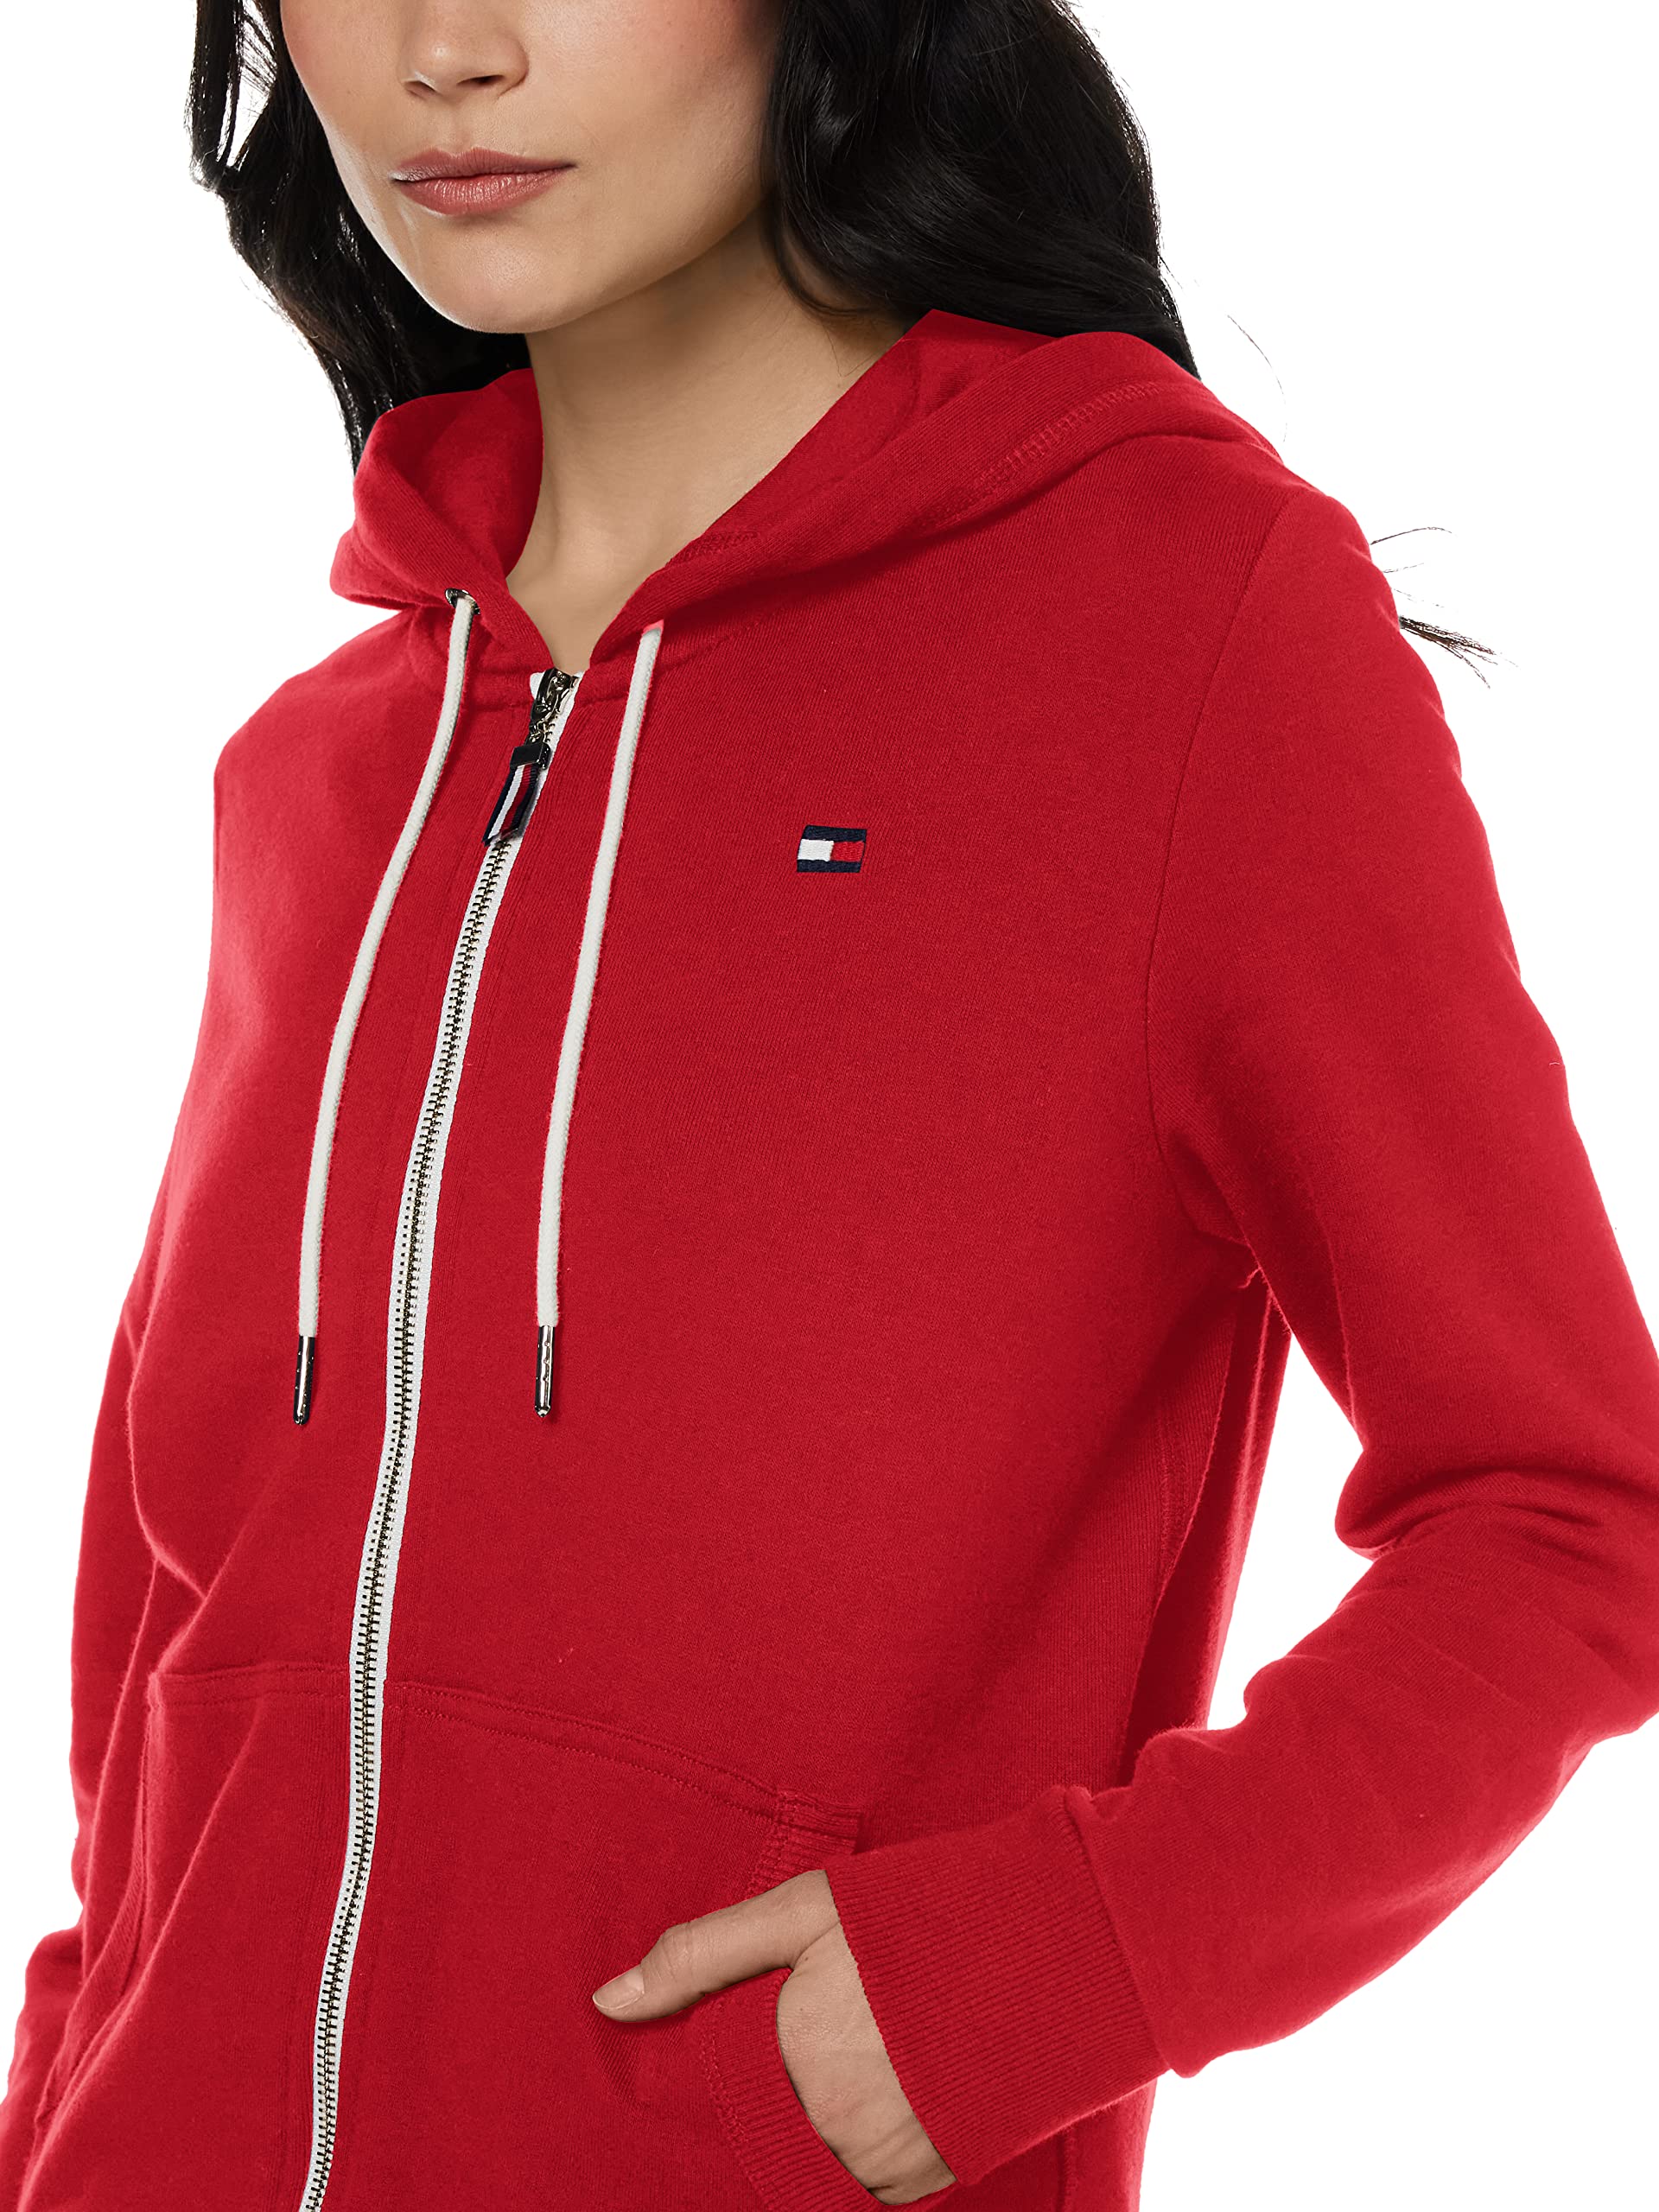 Tommy Hilfiger Zip-up Hoodie – Classic Sweatshirt for Women with Drawstrings and Hood